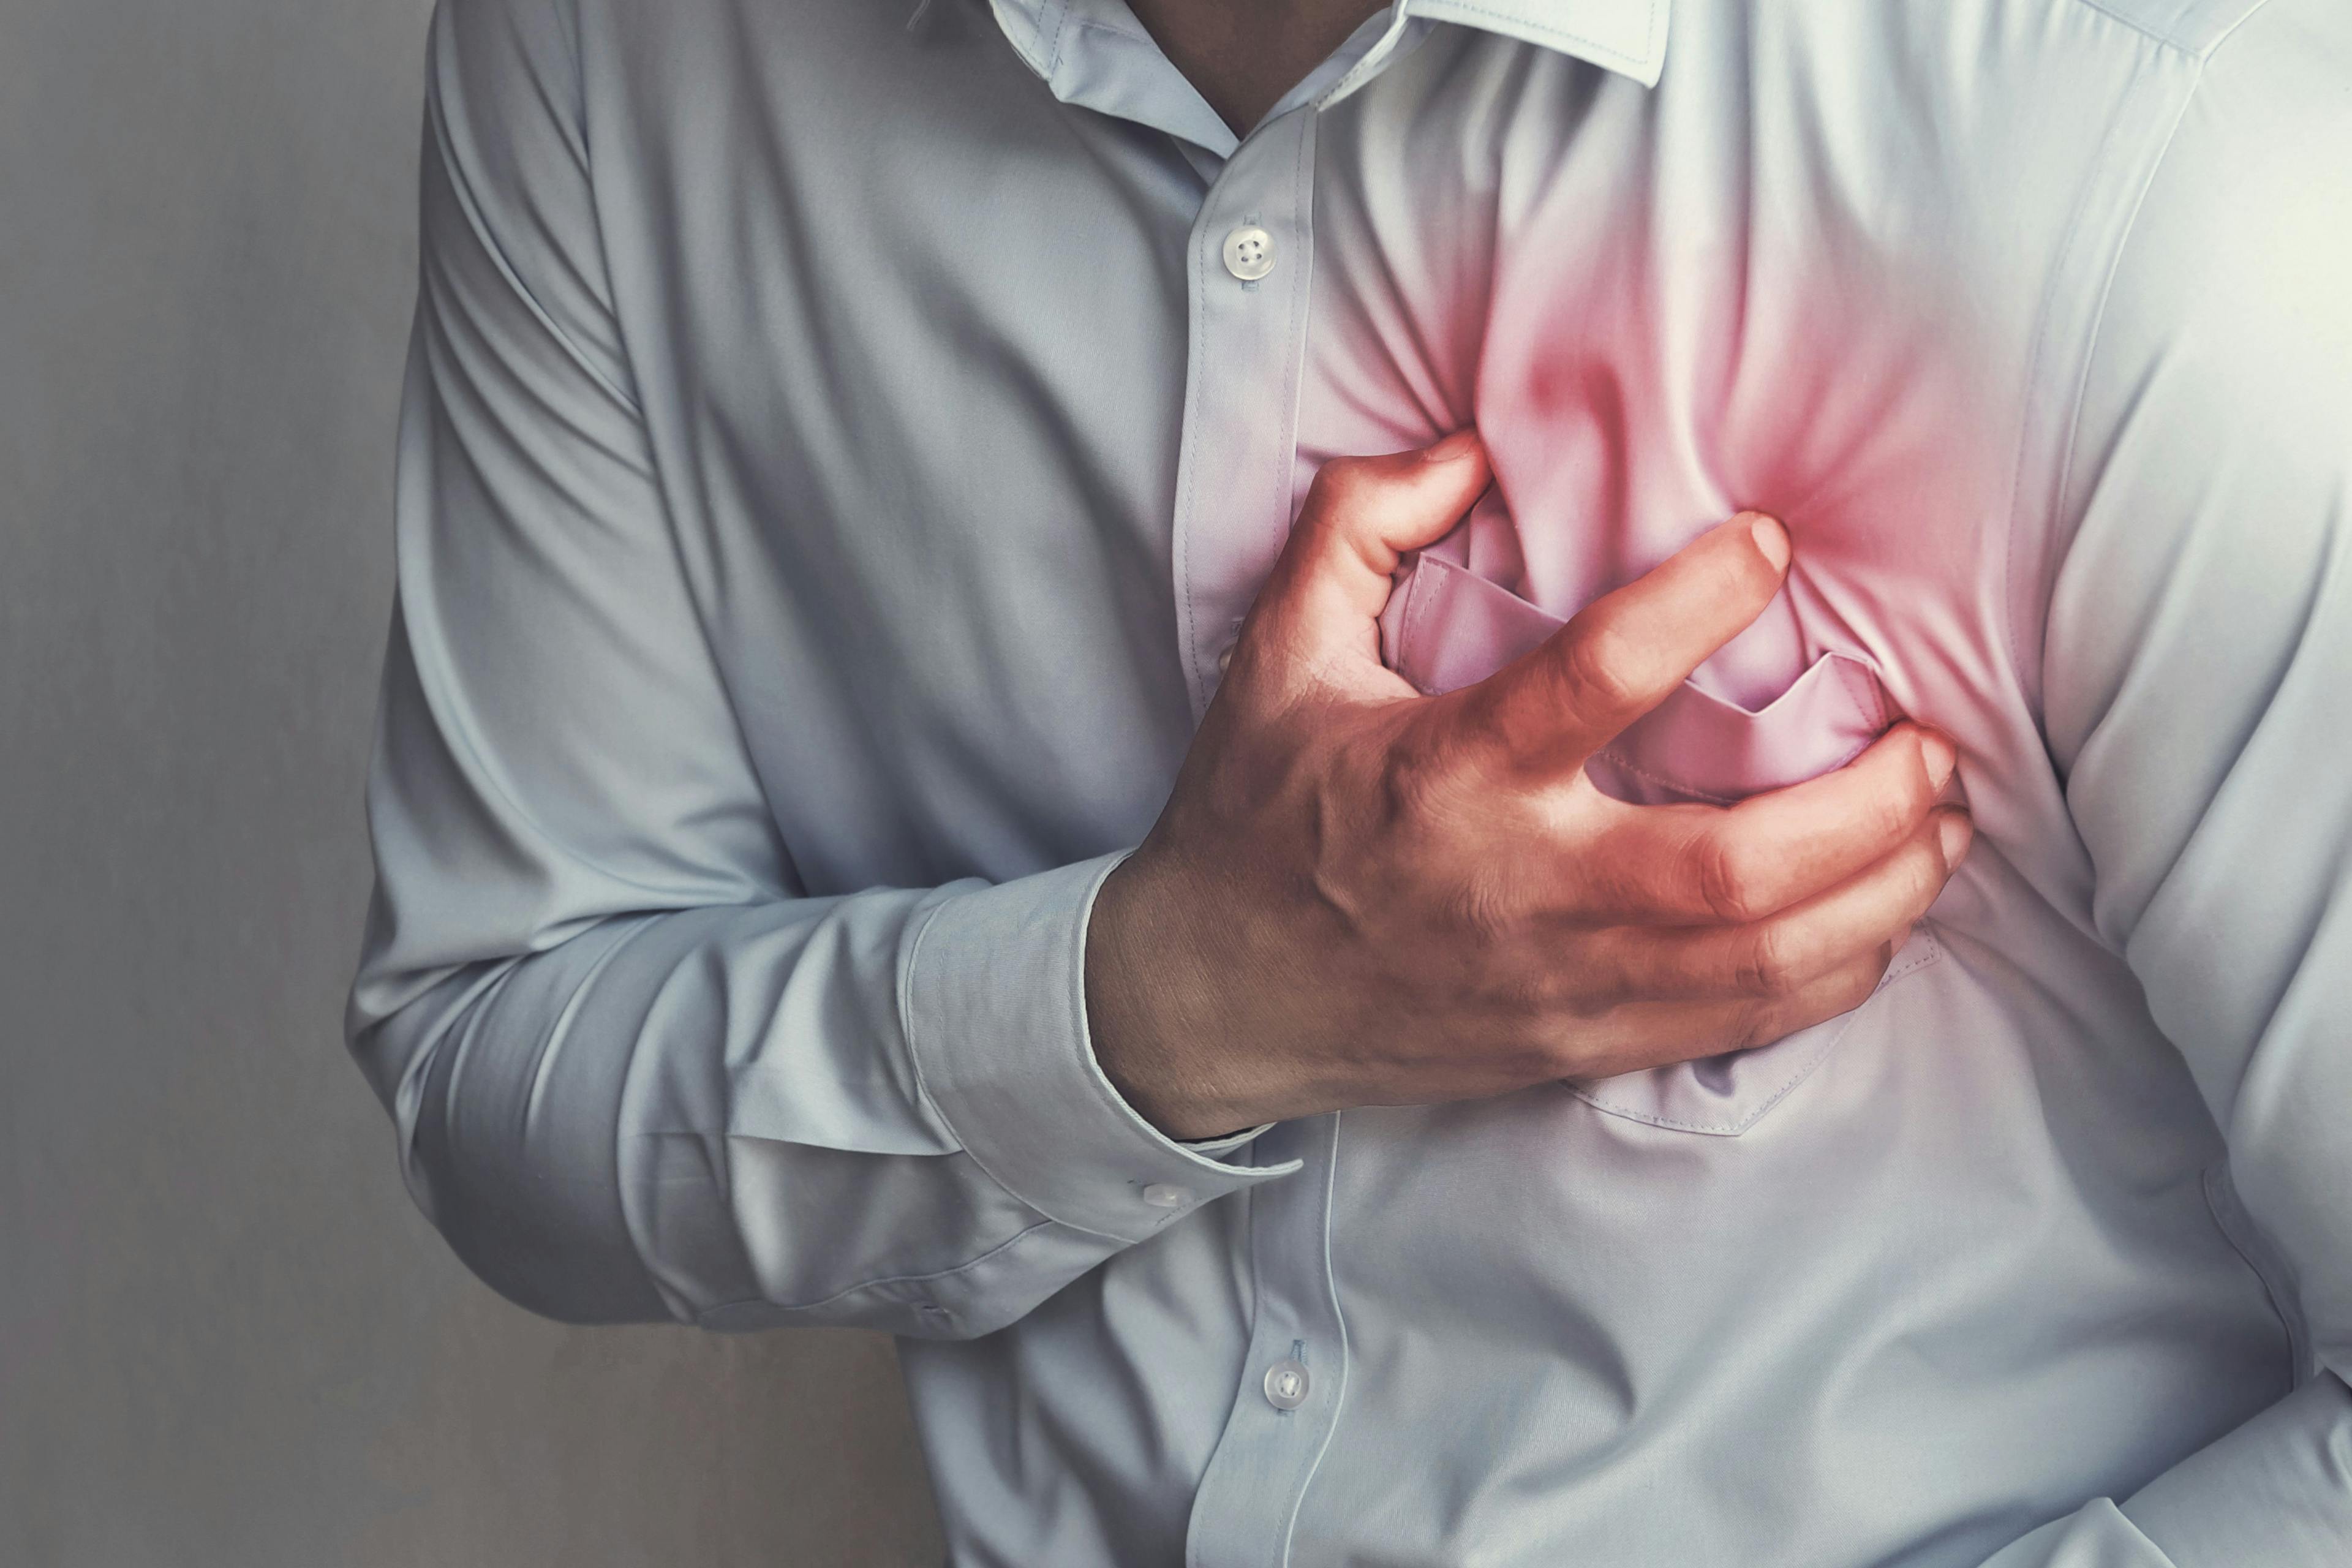 Heart Attack Linked With Higher Risk of Other Long-Term Health Conditions